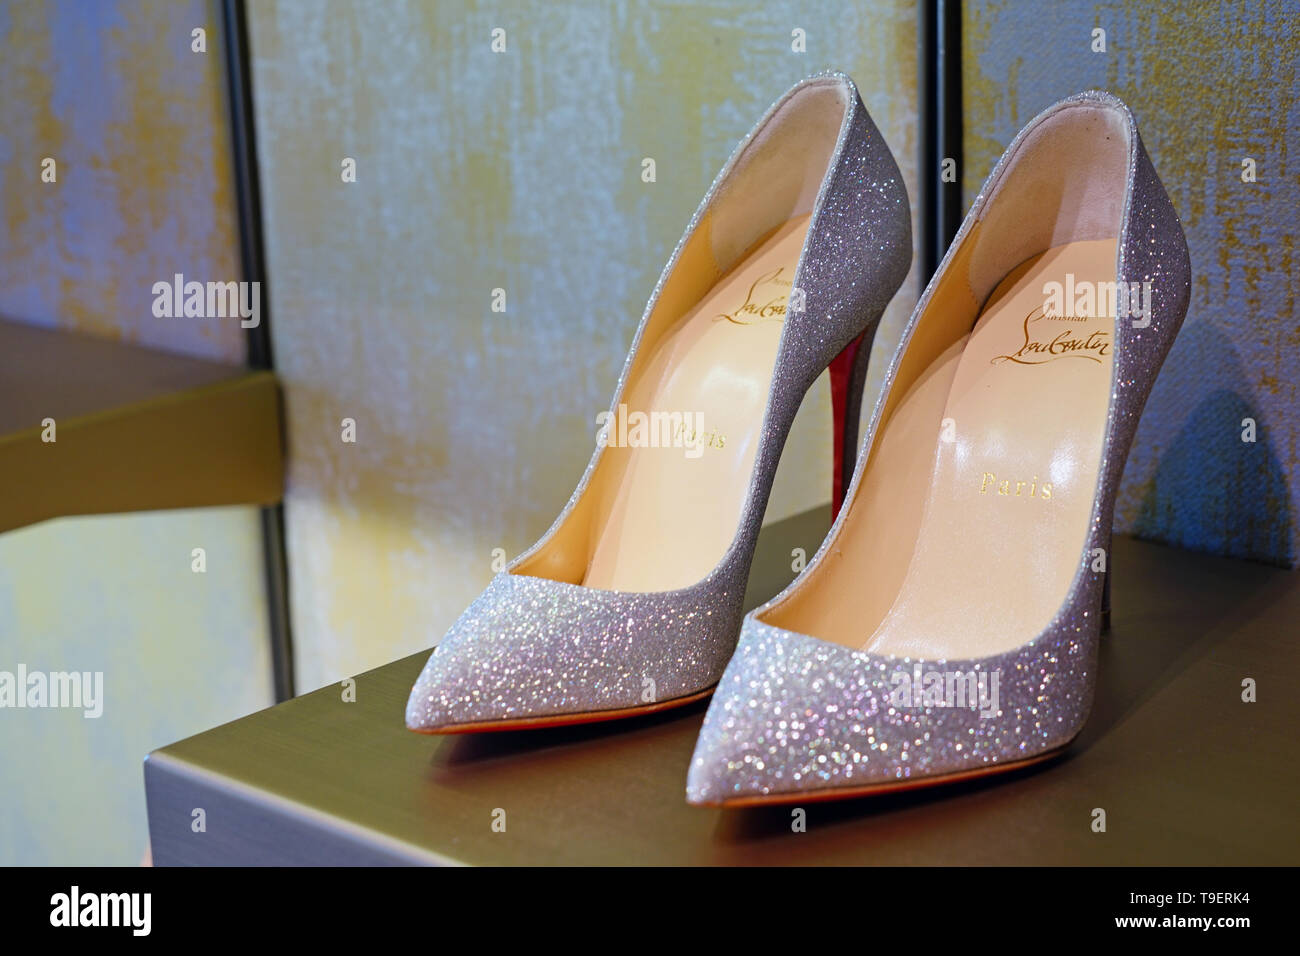 VENICE, ITALY -8 APR 2019- View of expensive high heel pump shoes by luxury  footwear brand Christian Louboutin for sale in a store in Venice Stock  Photo - Alamy